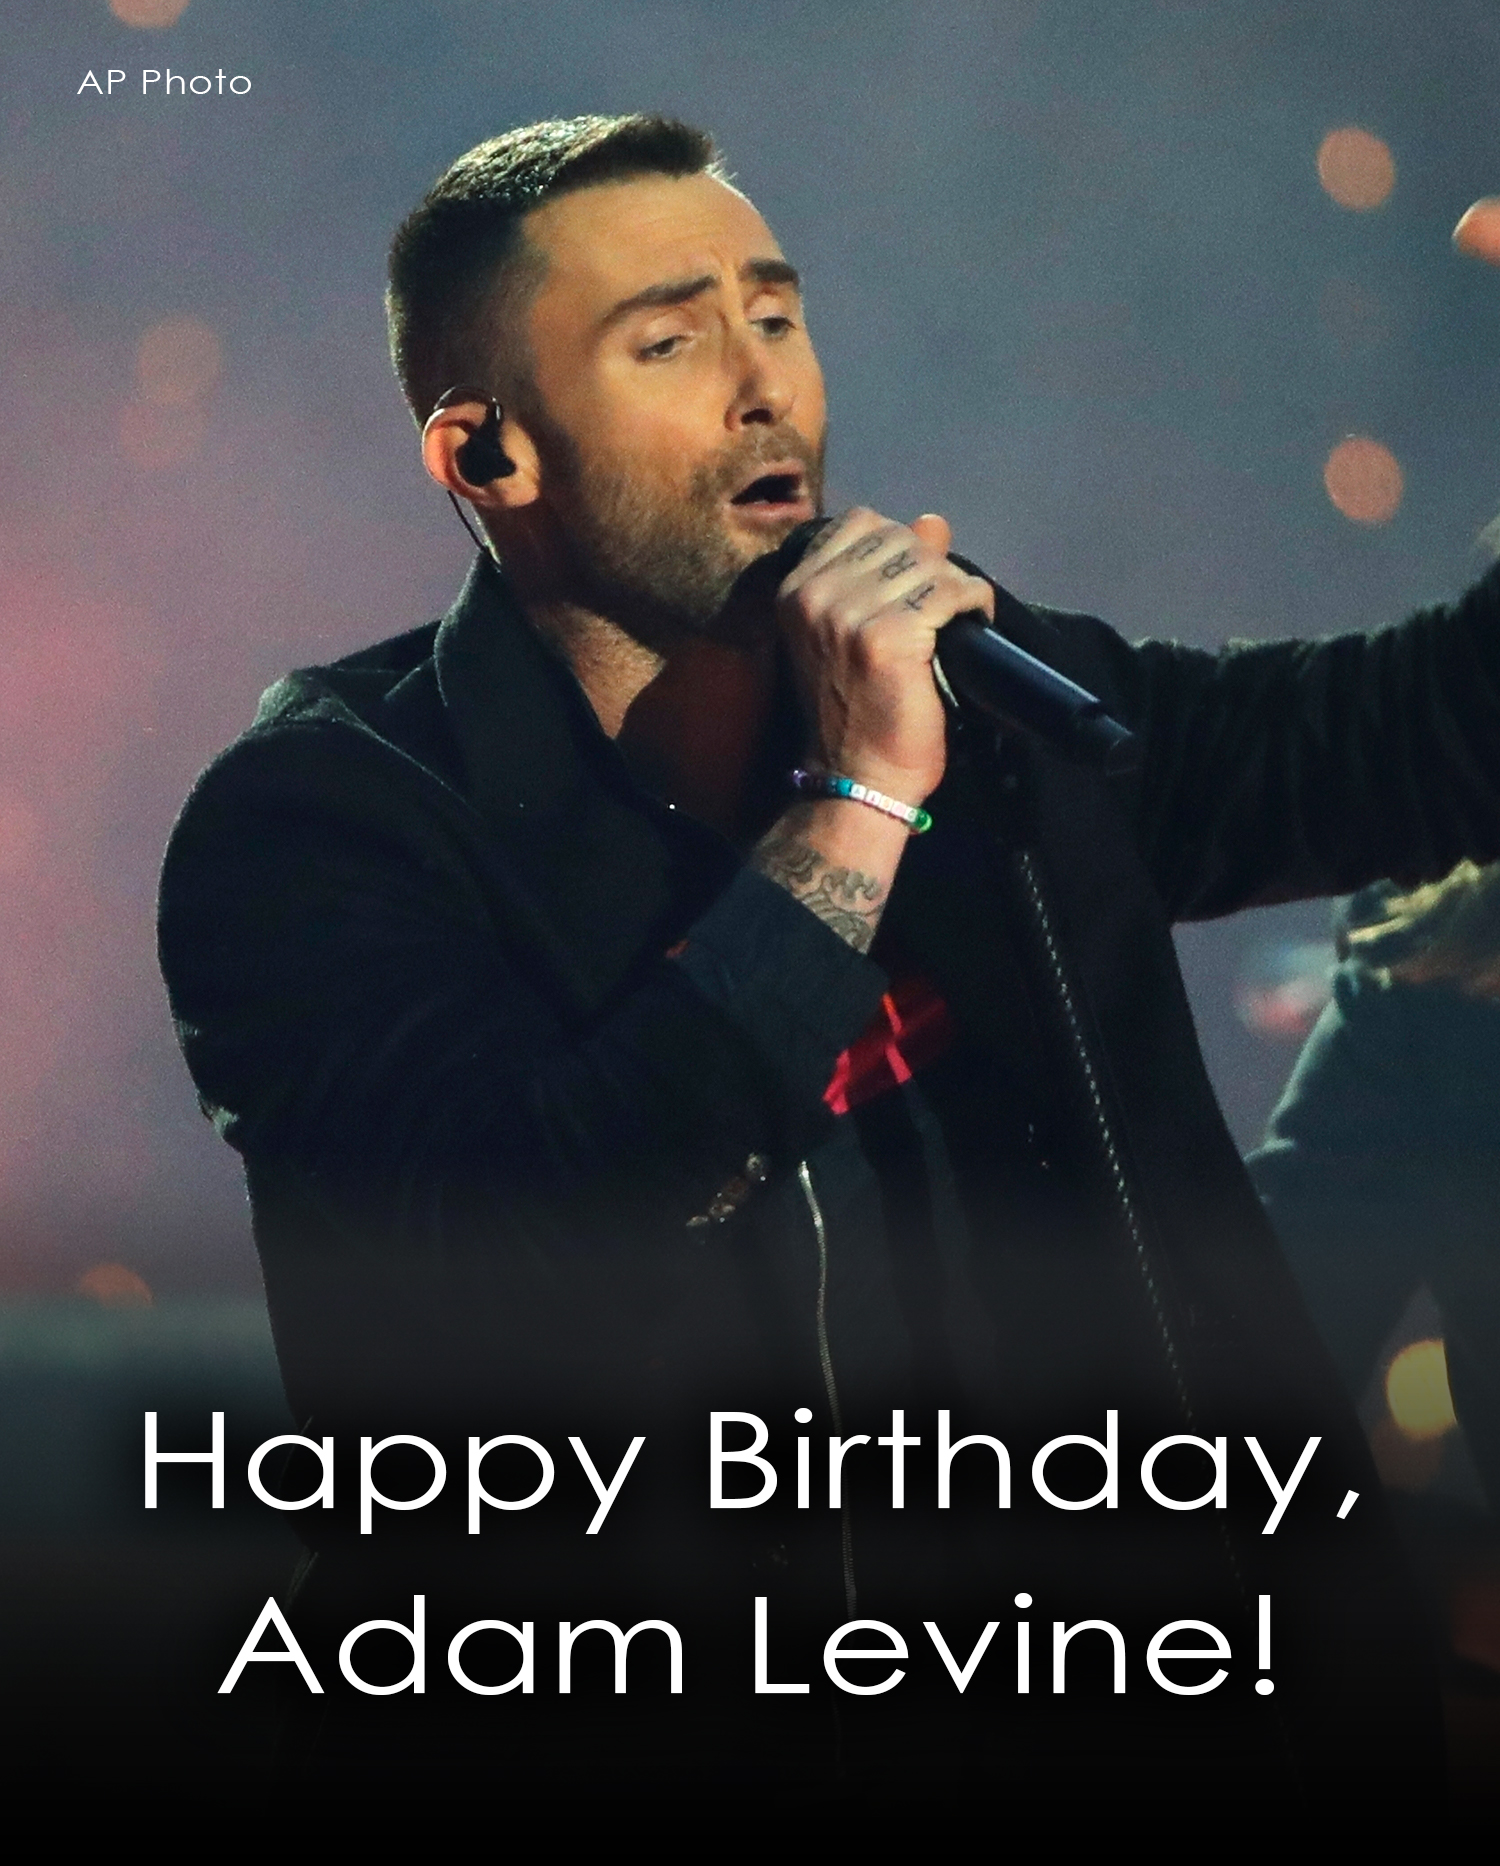 HAPPY BIRTHDAY, ADAM LEVINE! The lead vocalist of Maroon 5 is turning 44 today!   